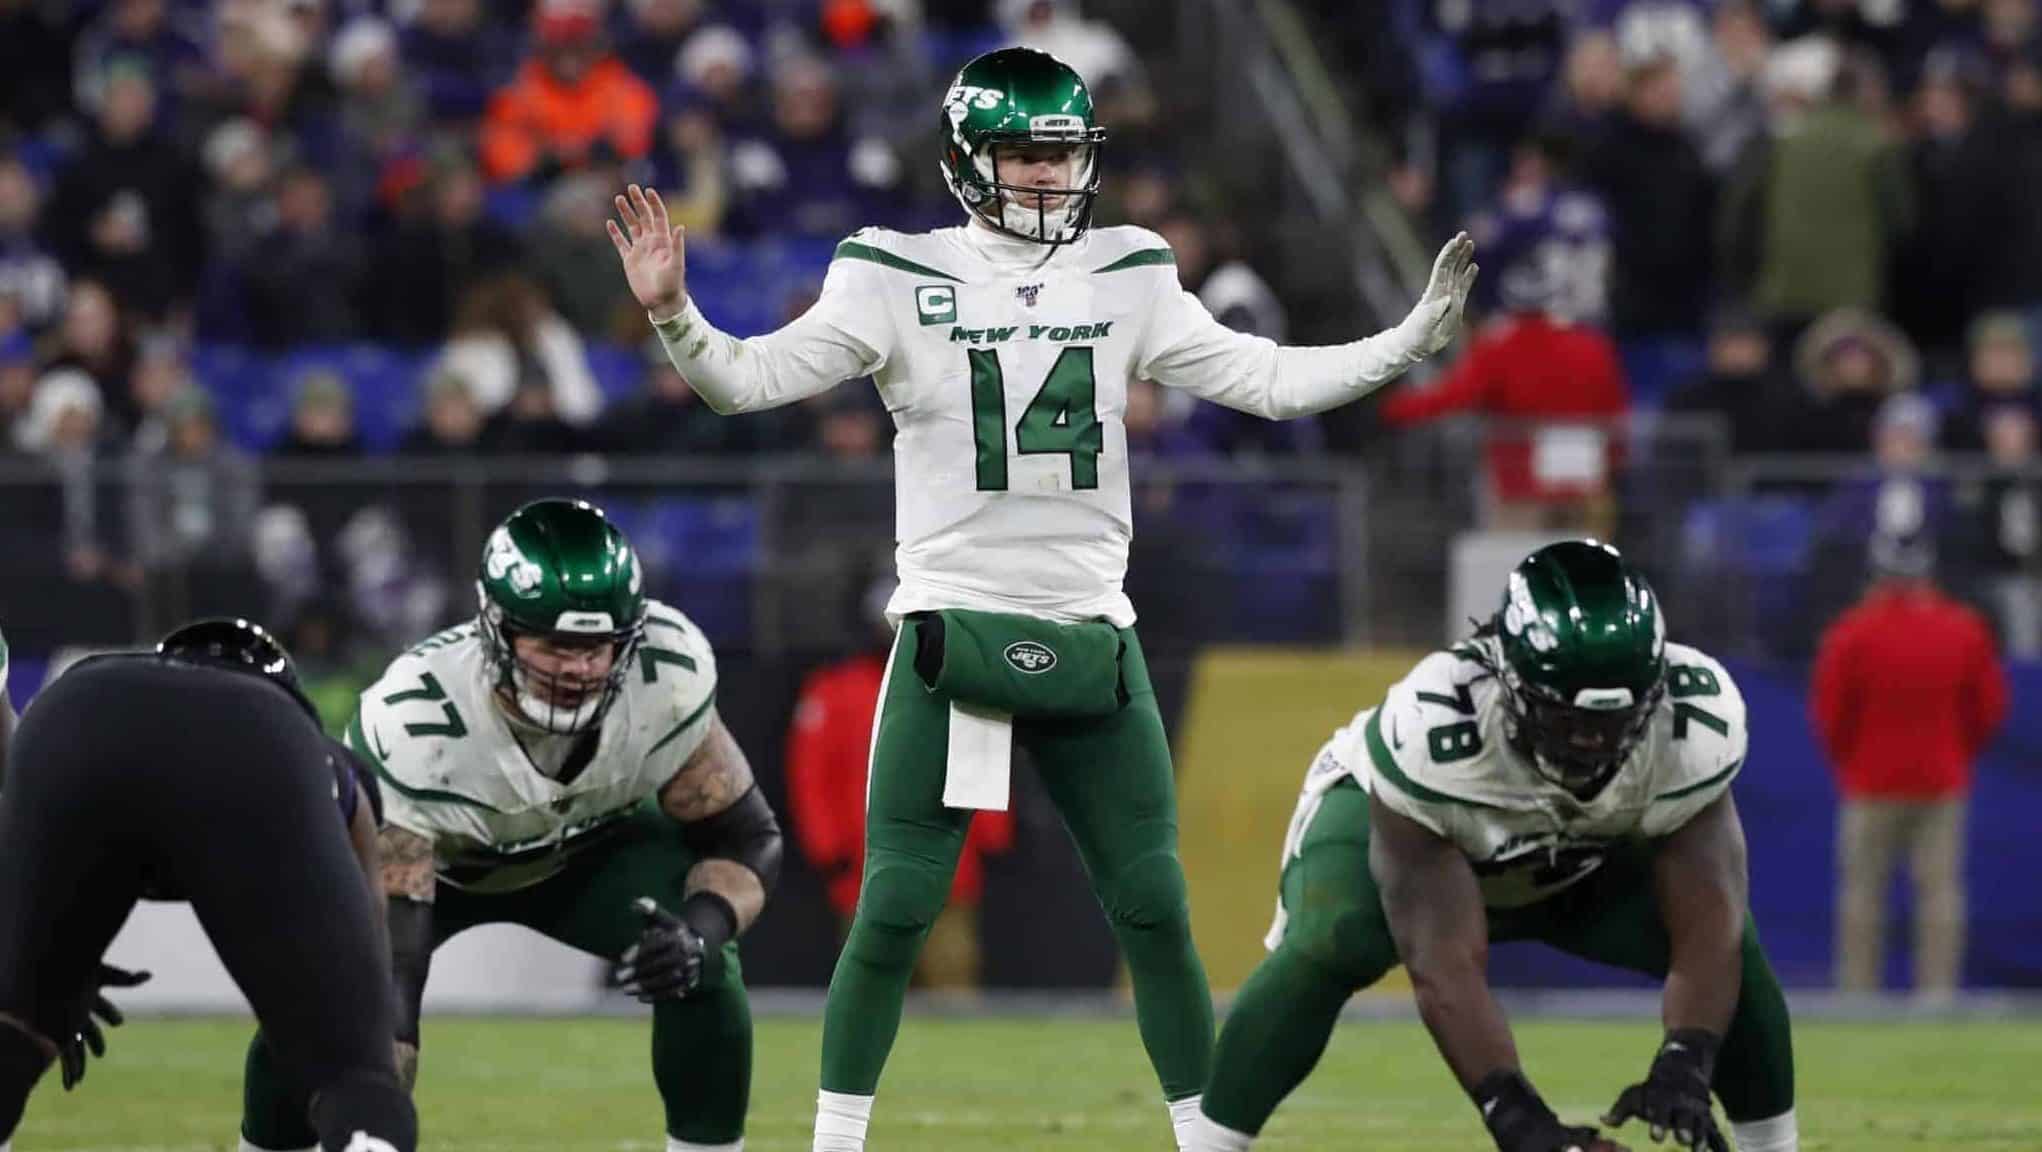 BALTIMORE, MARYLAND - DECEMBER 12: Quarterback Sam Darnold #14 of the New York Jets signals at the line of scrimmage during the second quarter against the Baltimore Ravens at M&T Bank Stadium on December 12, 2019 in Baltimore, Maryland.